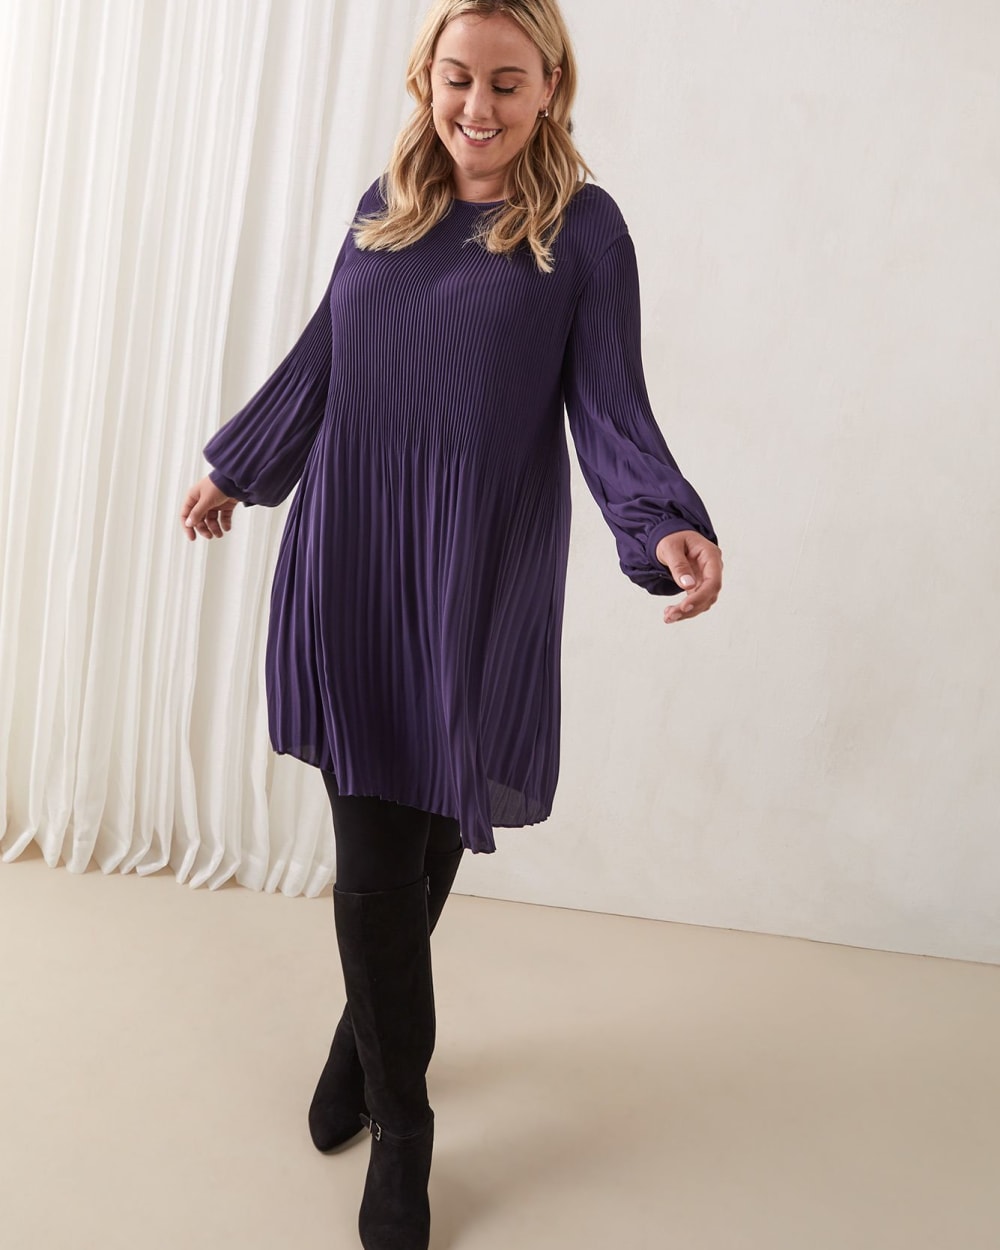 Long-Sleeve Dress With Pleats - In Every Story